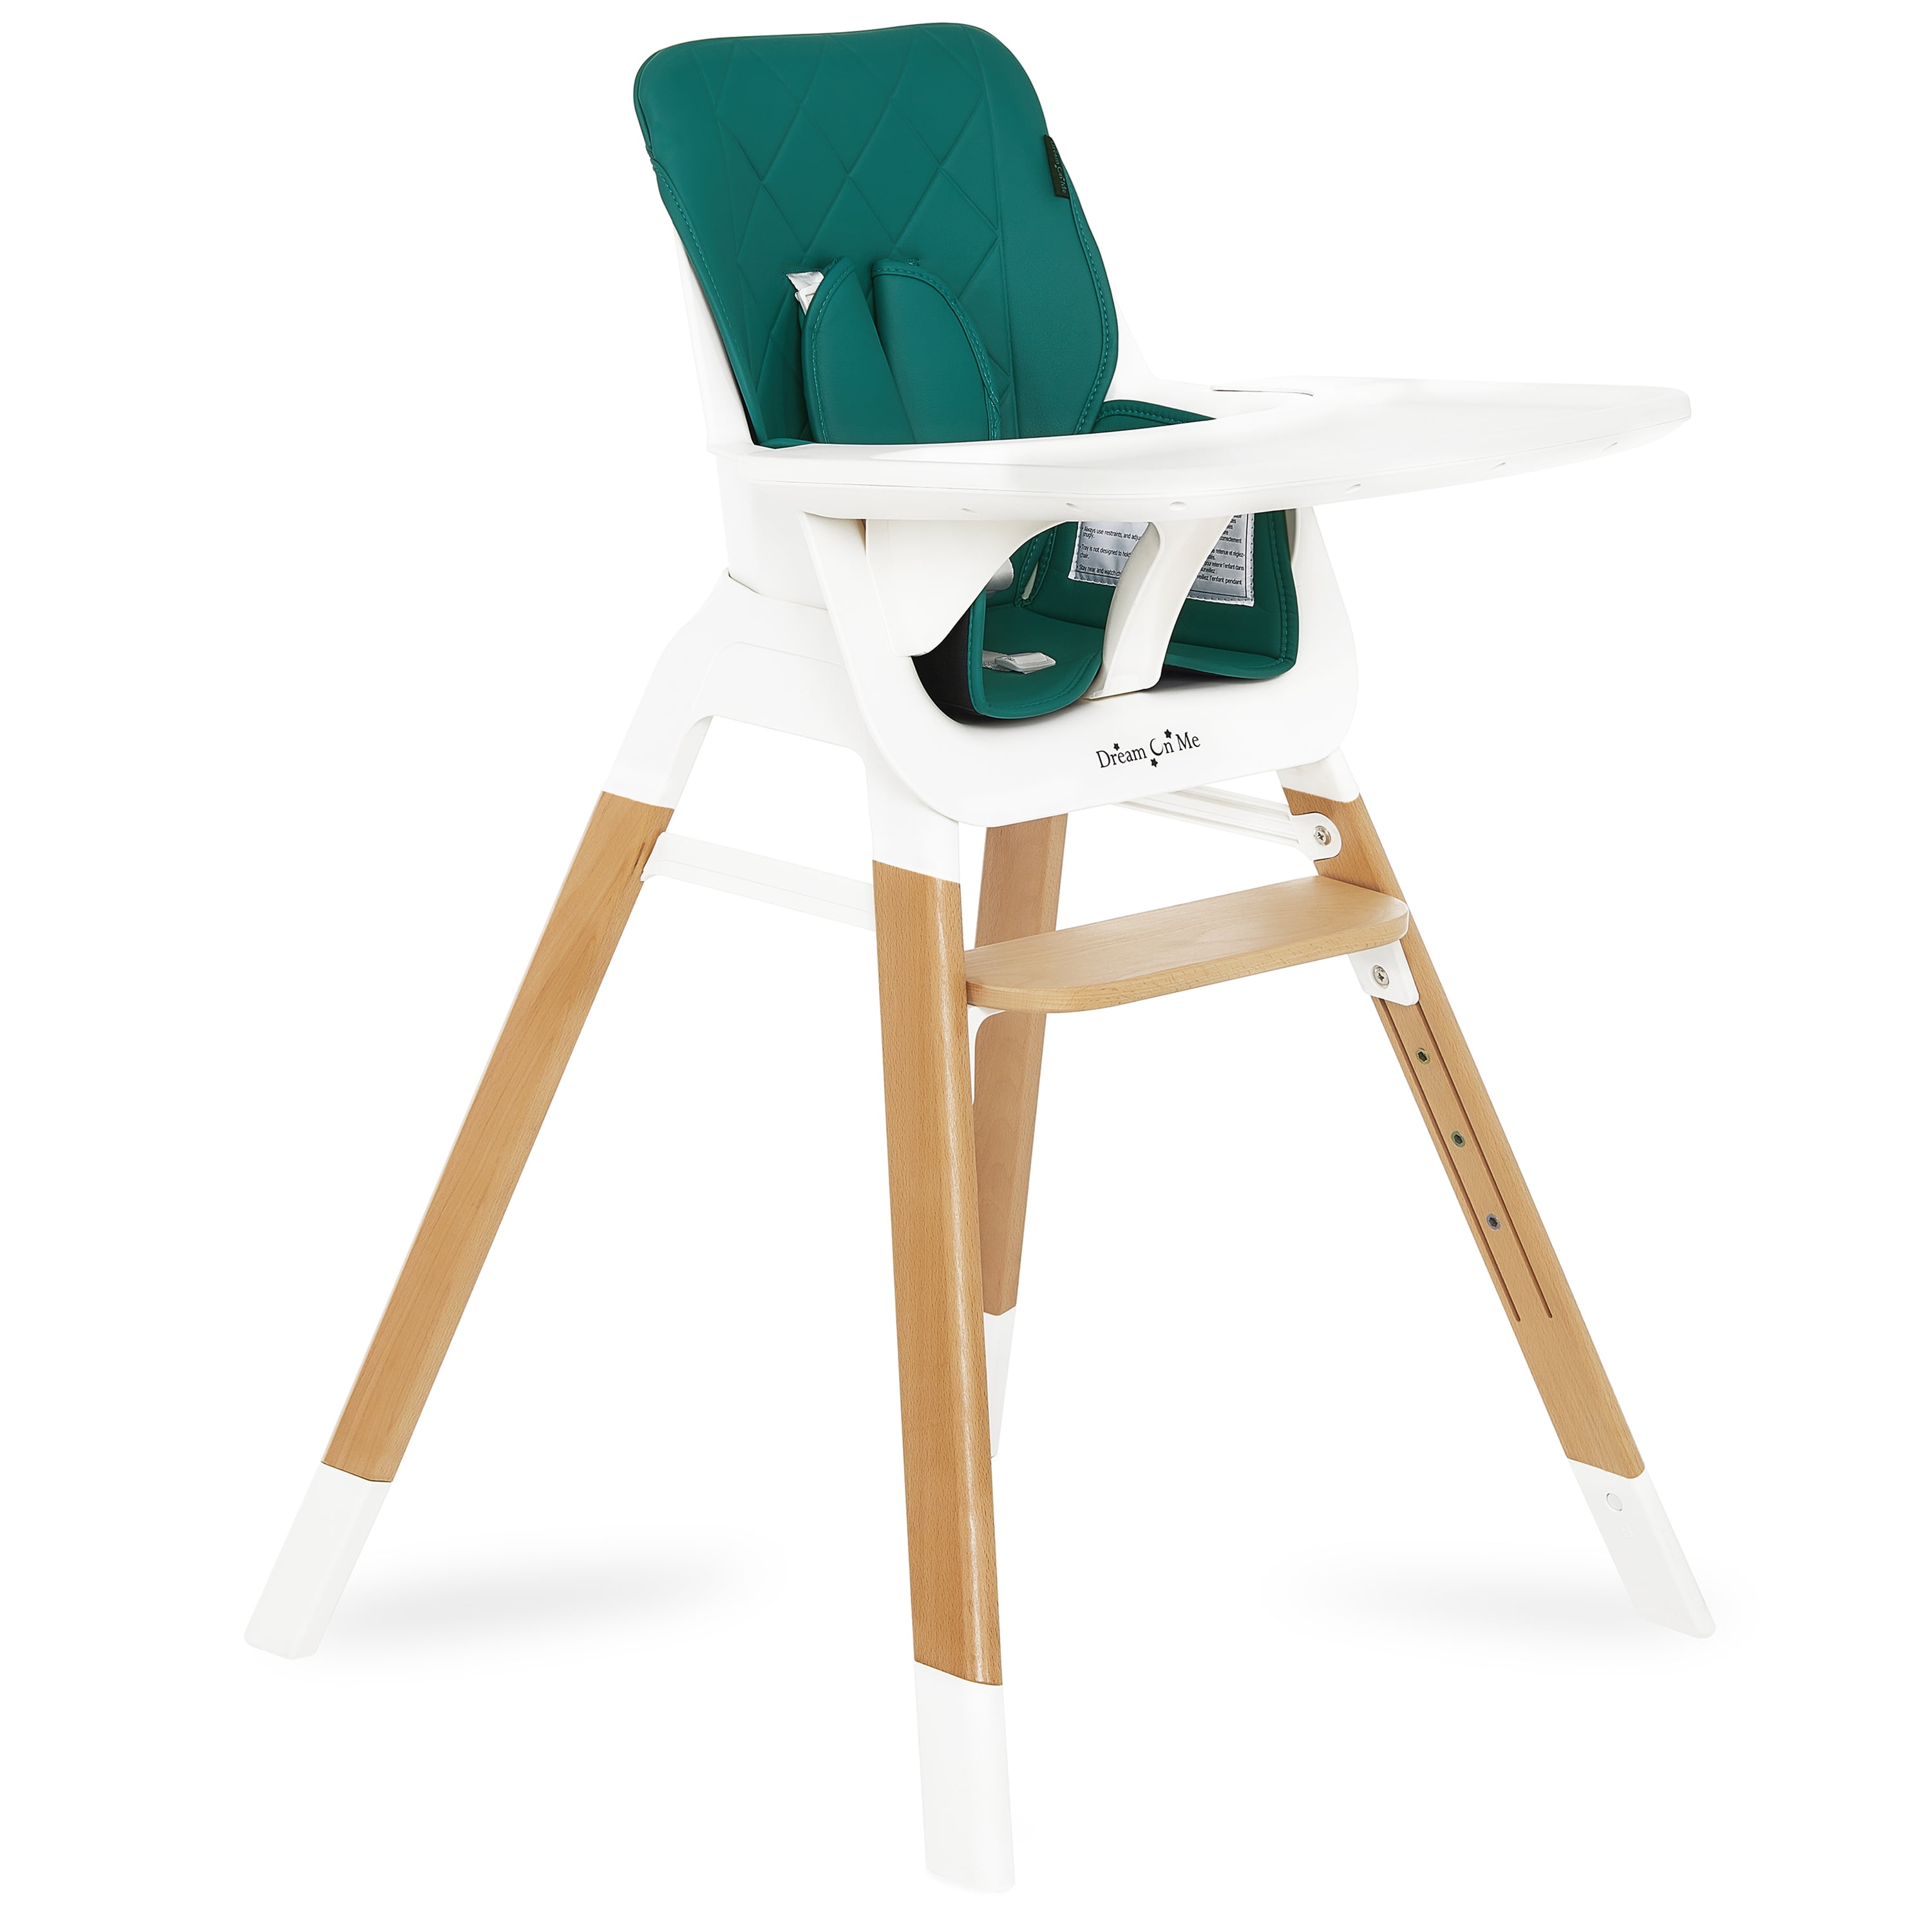 Portable Baby Wooden High Chair With Feeding Tray Seat  Adjustable Highchair UK 